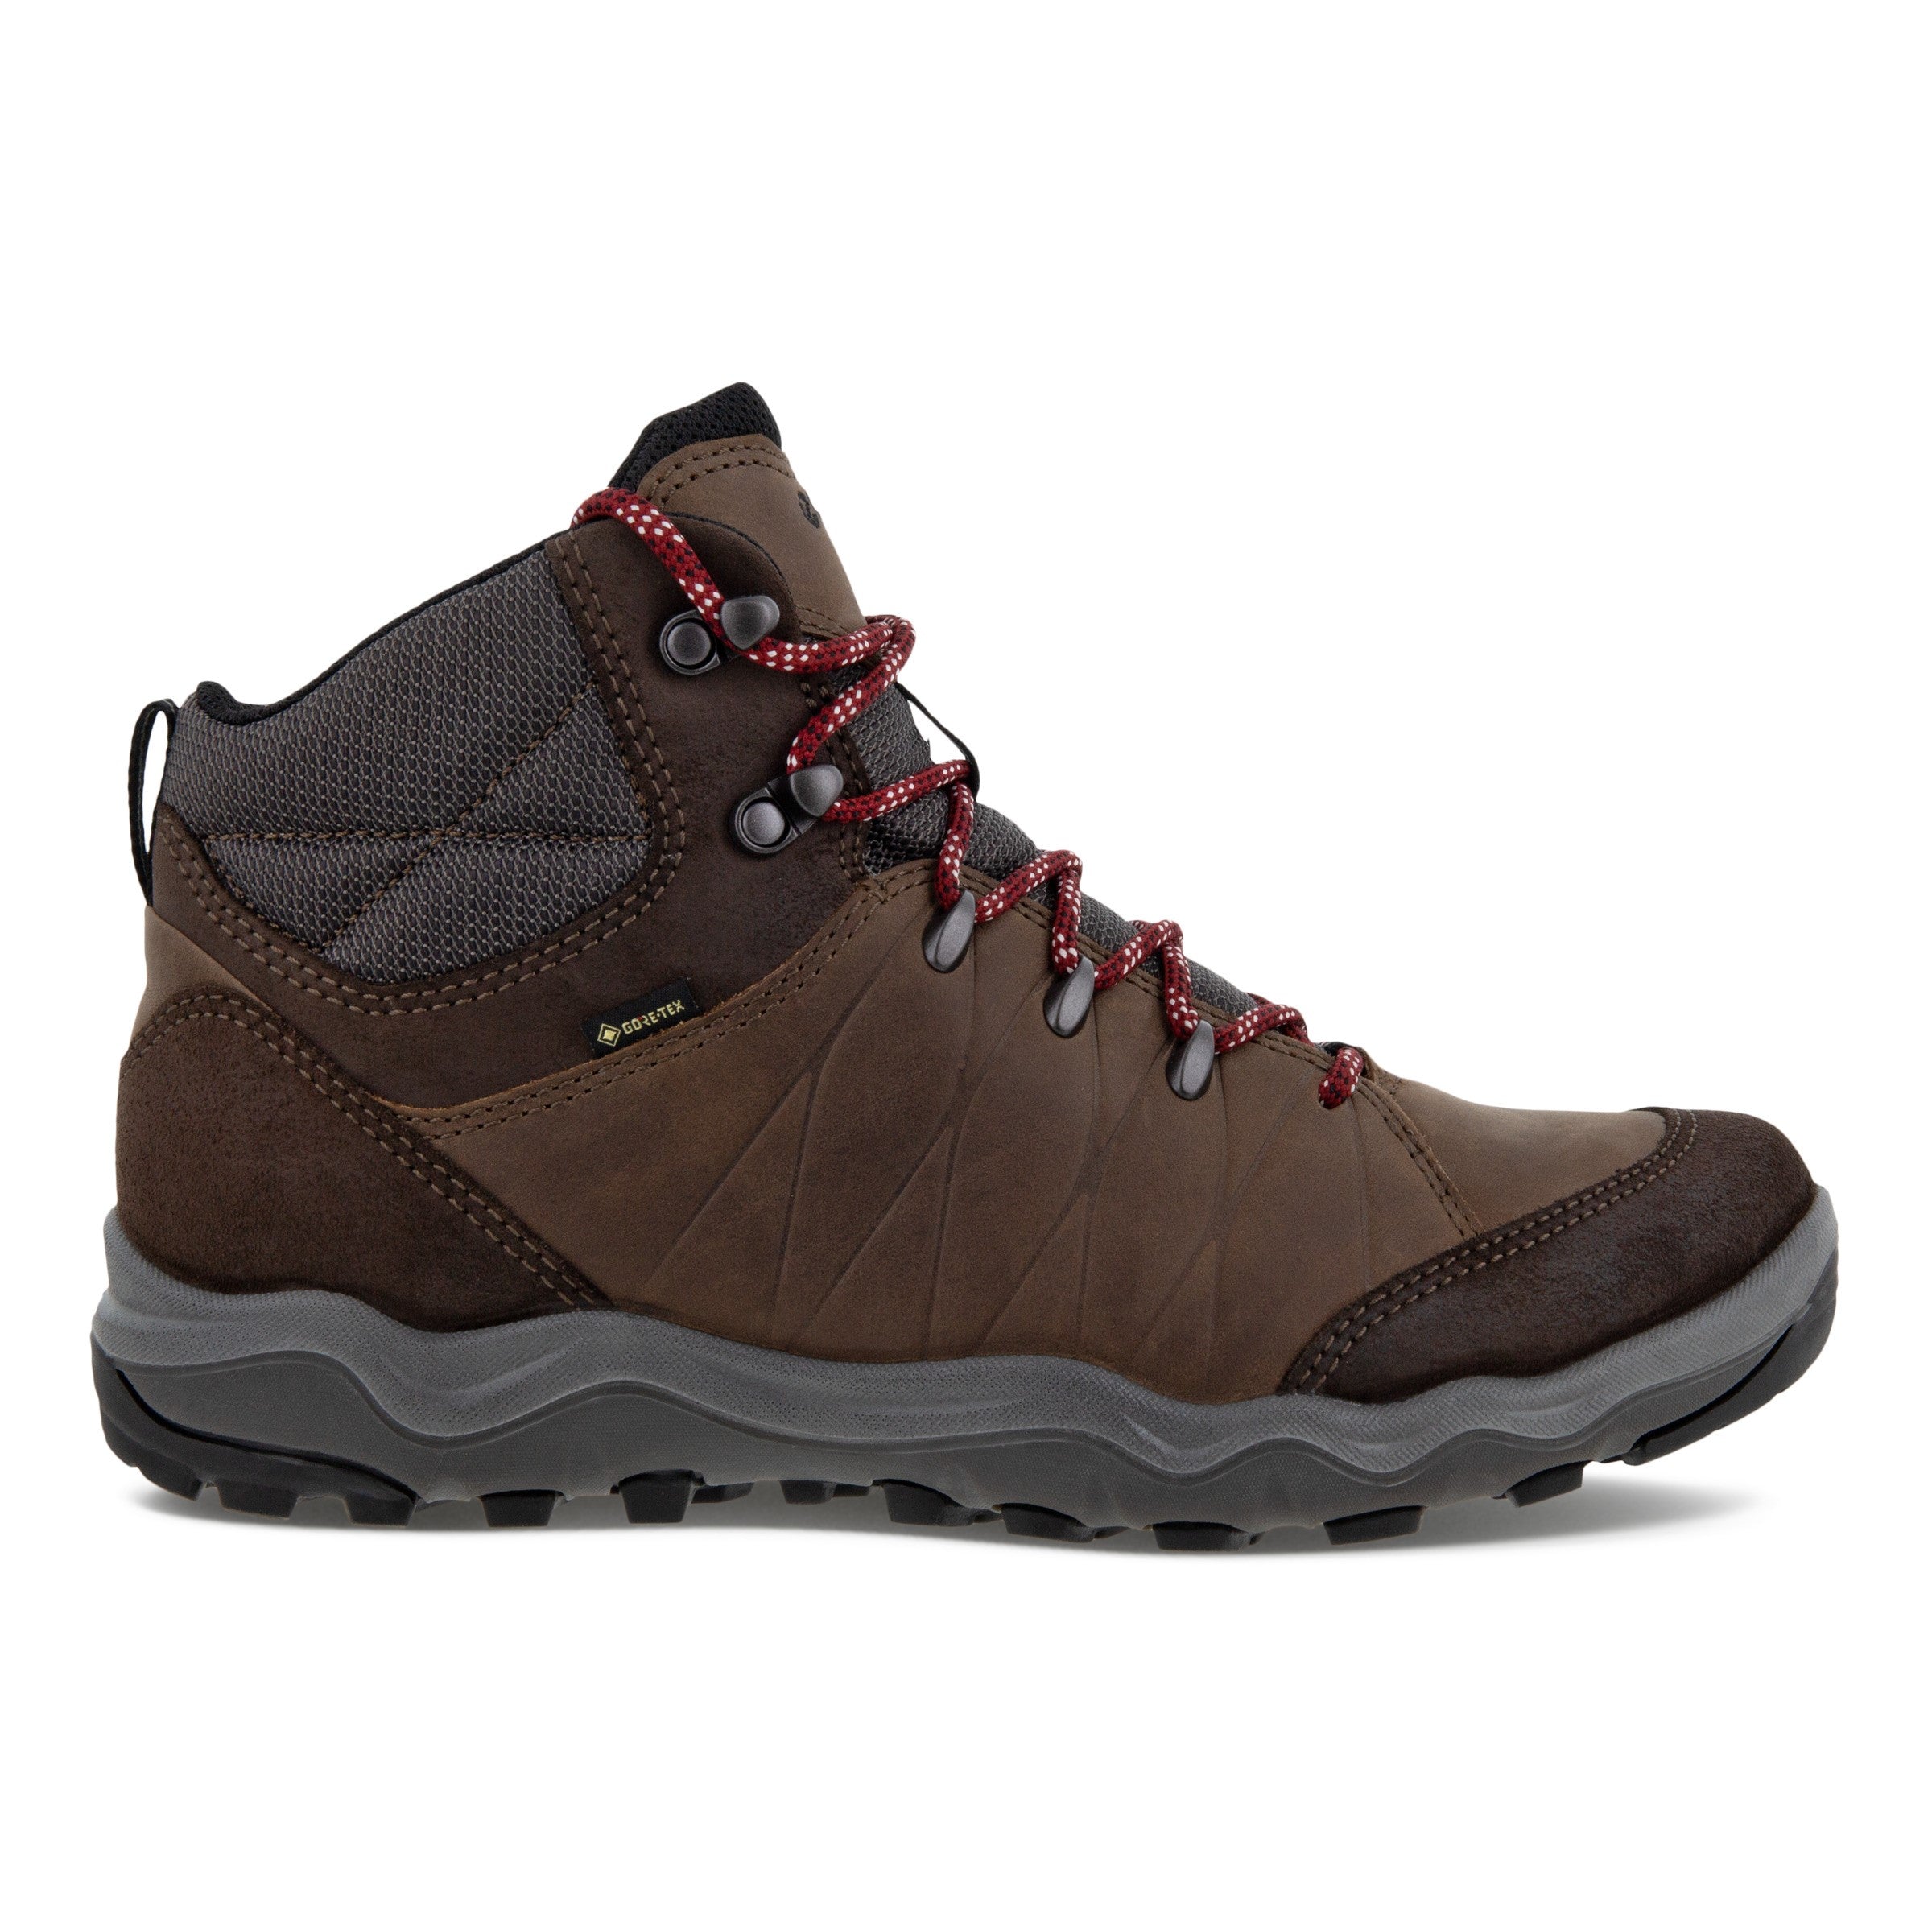 Ecco Ulterra M Mid GTX 823224 55821 Mens Licorice &n Coffee Leather Waterproof Lace Up Ankle Boots